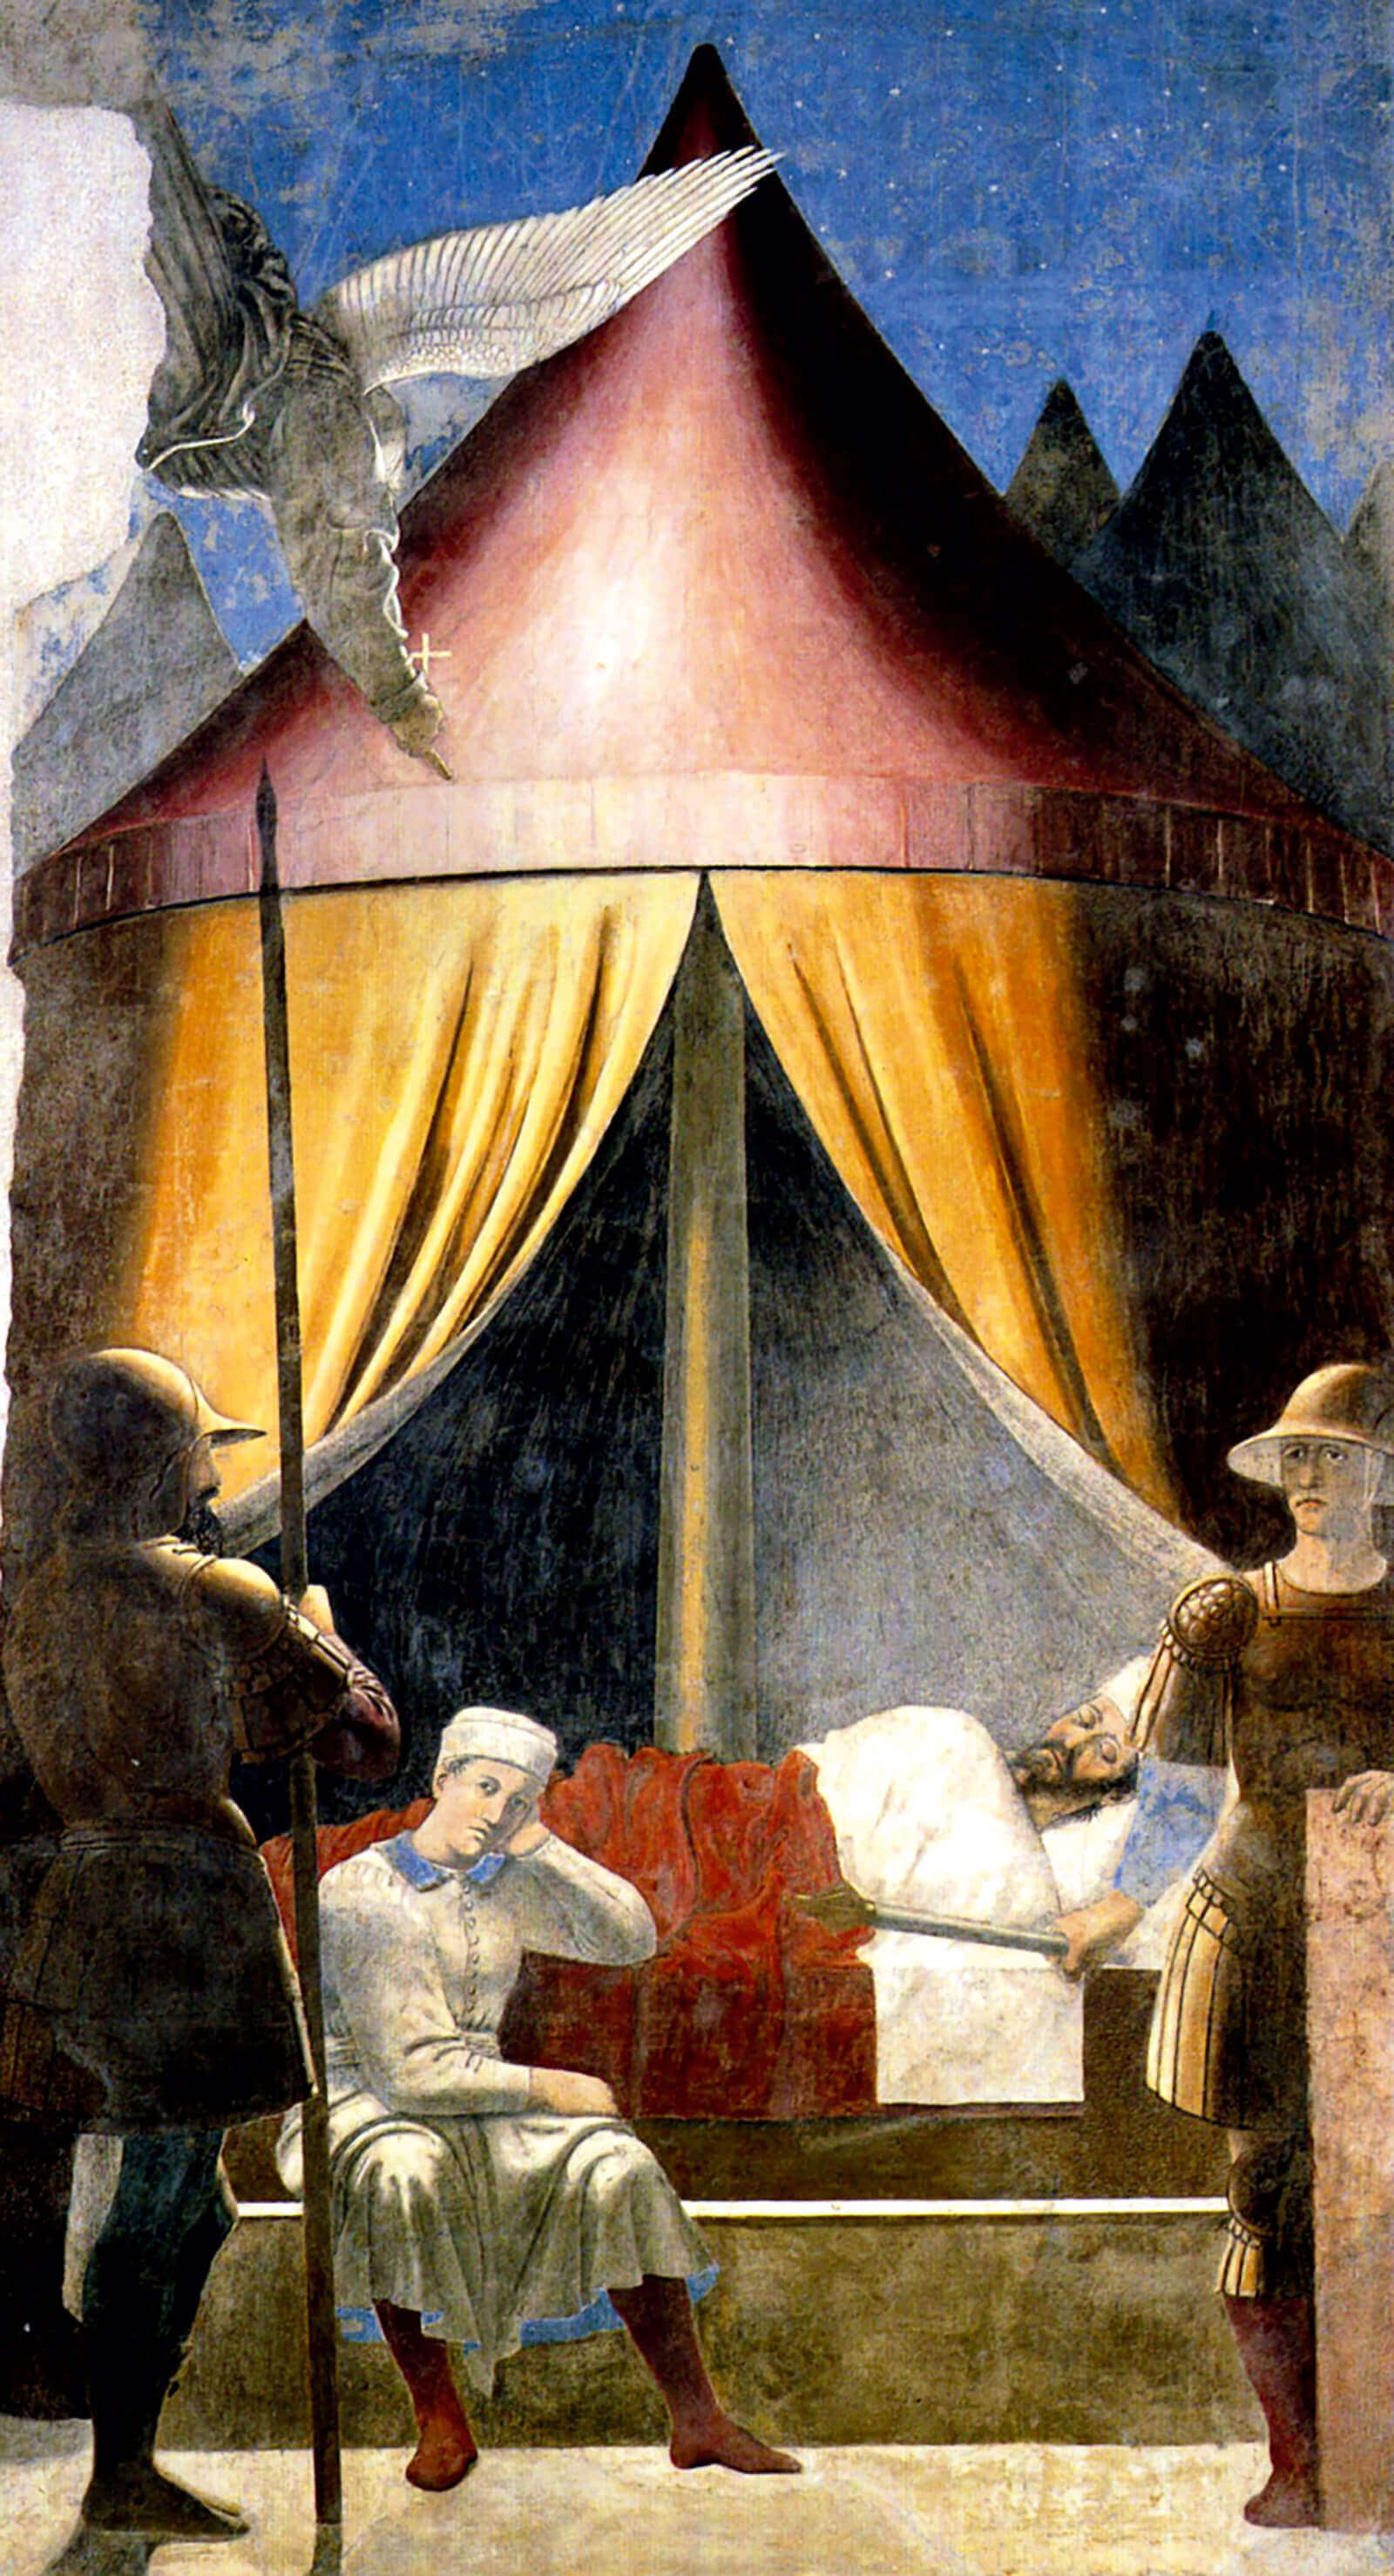 A fourteen sixties painting by artist Piero della Francesca entitled, “Dream of Constantine,” located in Basilica di San Francesco, Arezzo, Italy. The fresco depicts one of the last pan-Mediterranean legends of dream sharing. In three hundred and twelve, the Emperor Constantine, on the eve of the Battle of the Milvian Bridge with his rival Maxentius, is said to have dreamt of a cross emblazoned with the words, “By this sign you will conquer.” Victorious, he would convert himself, and the Roman Empire, to Christianity.